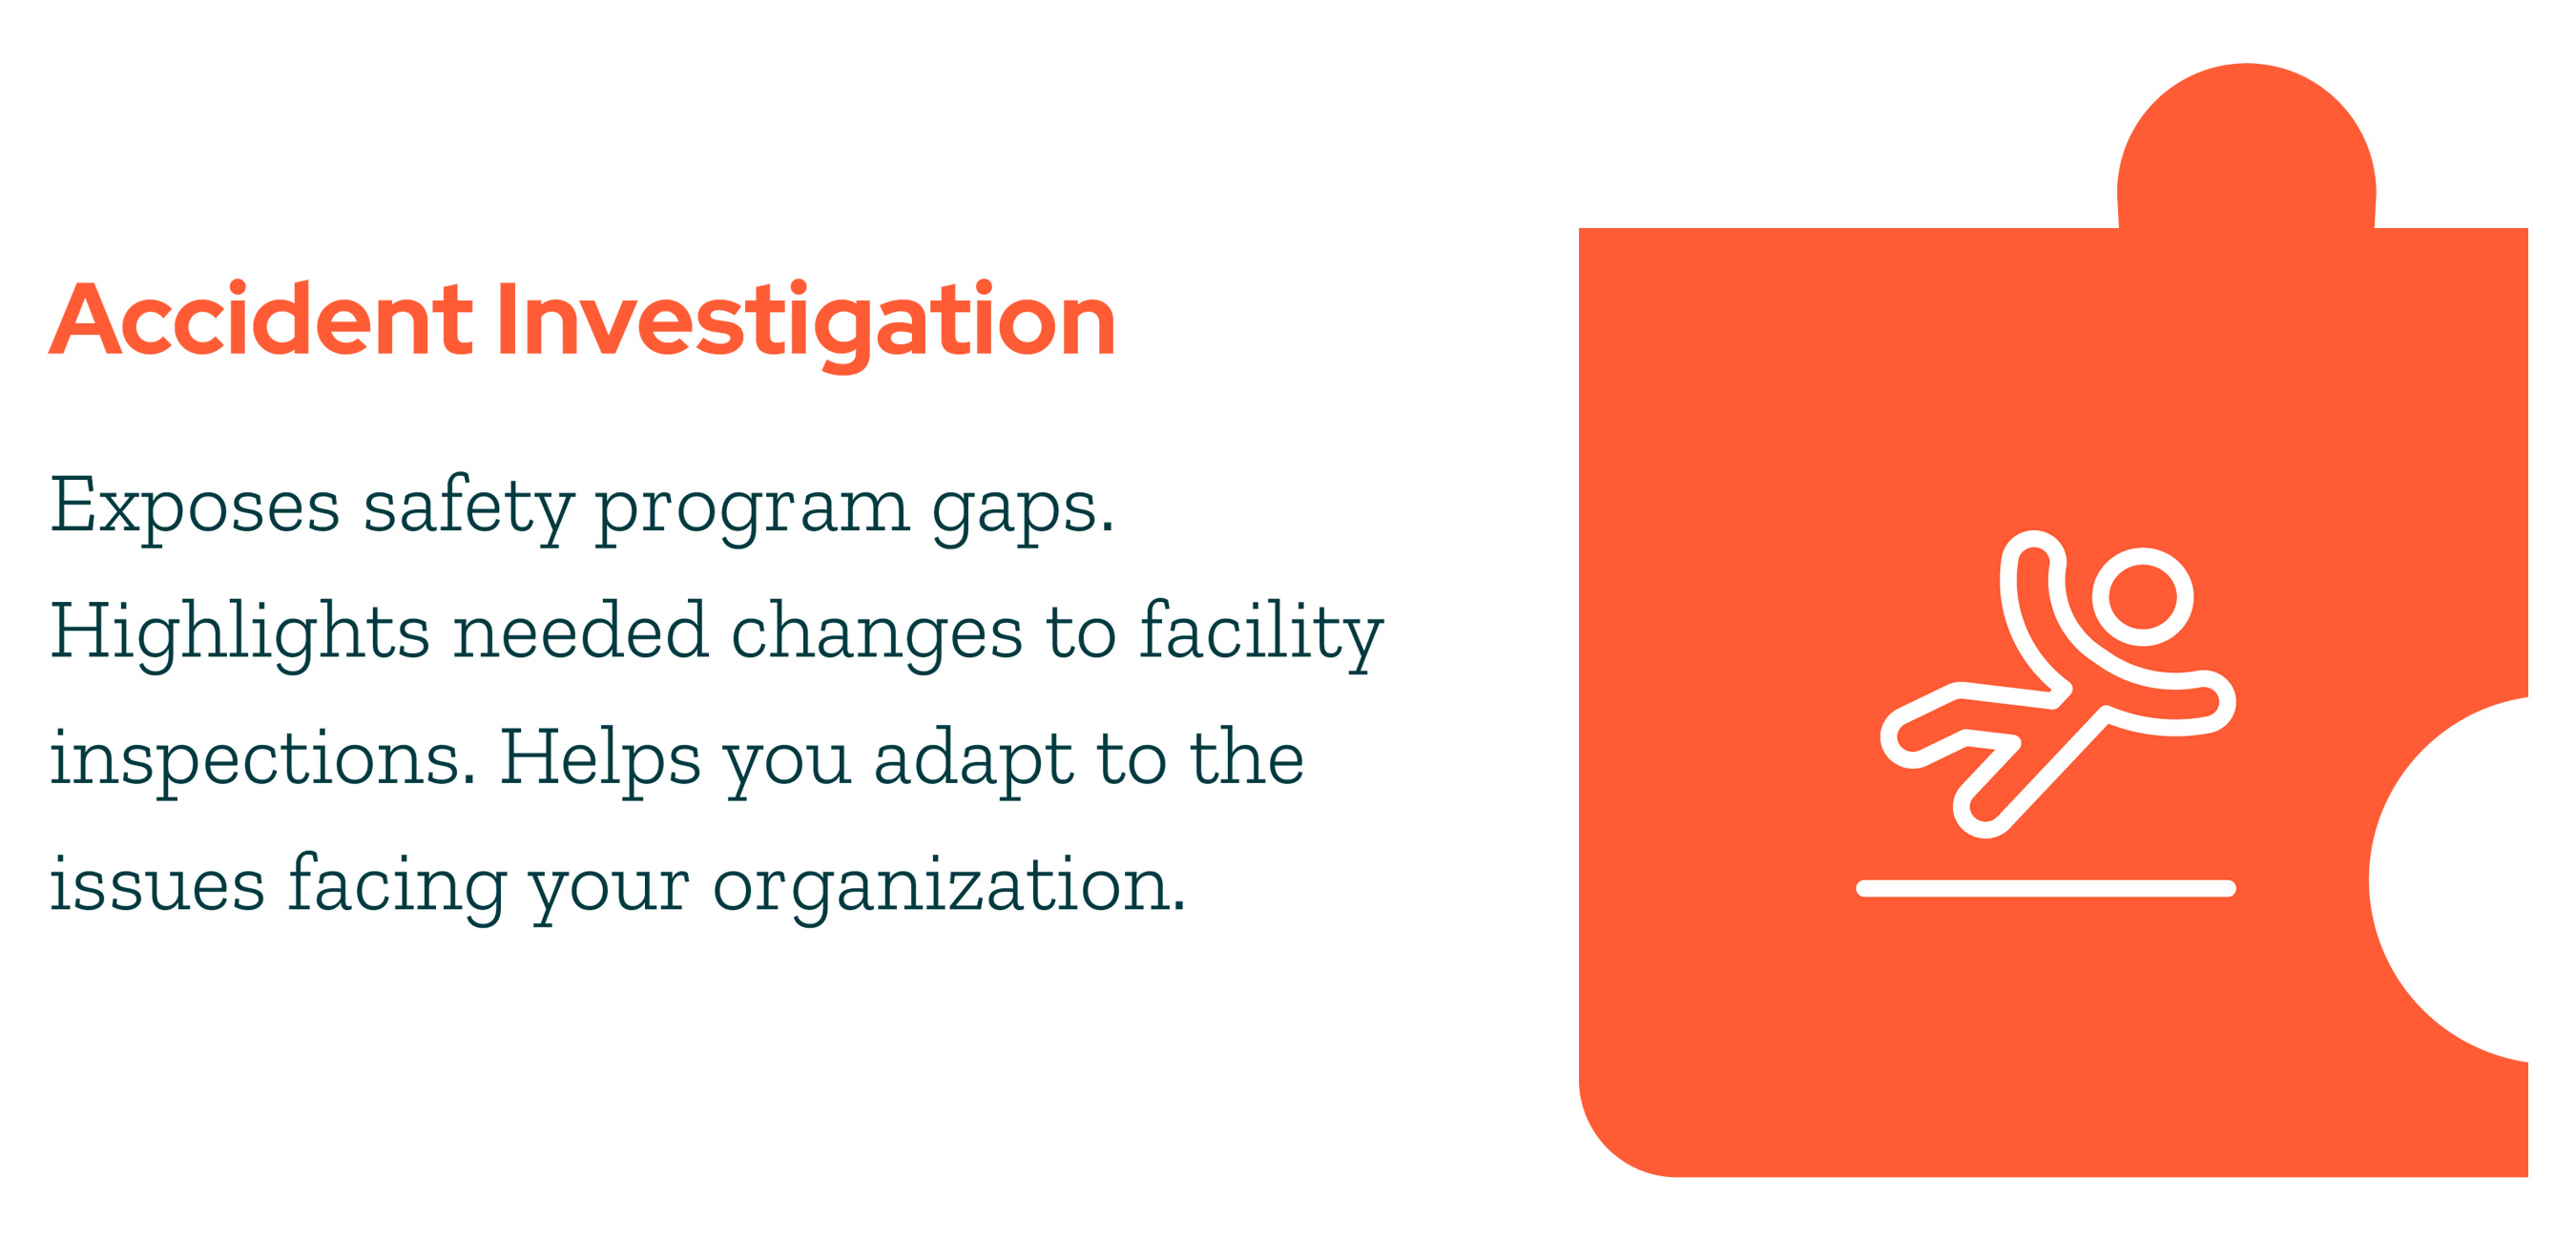 Accident Investigation - Exposes safety program gaps. Highlights needed changes to facility inspections. Helps you adapt to the issues facing your organization.